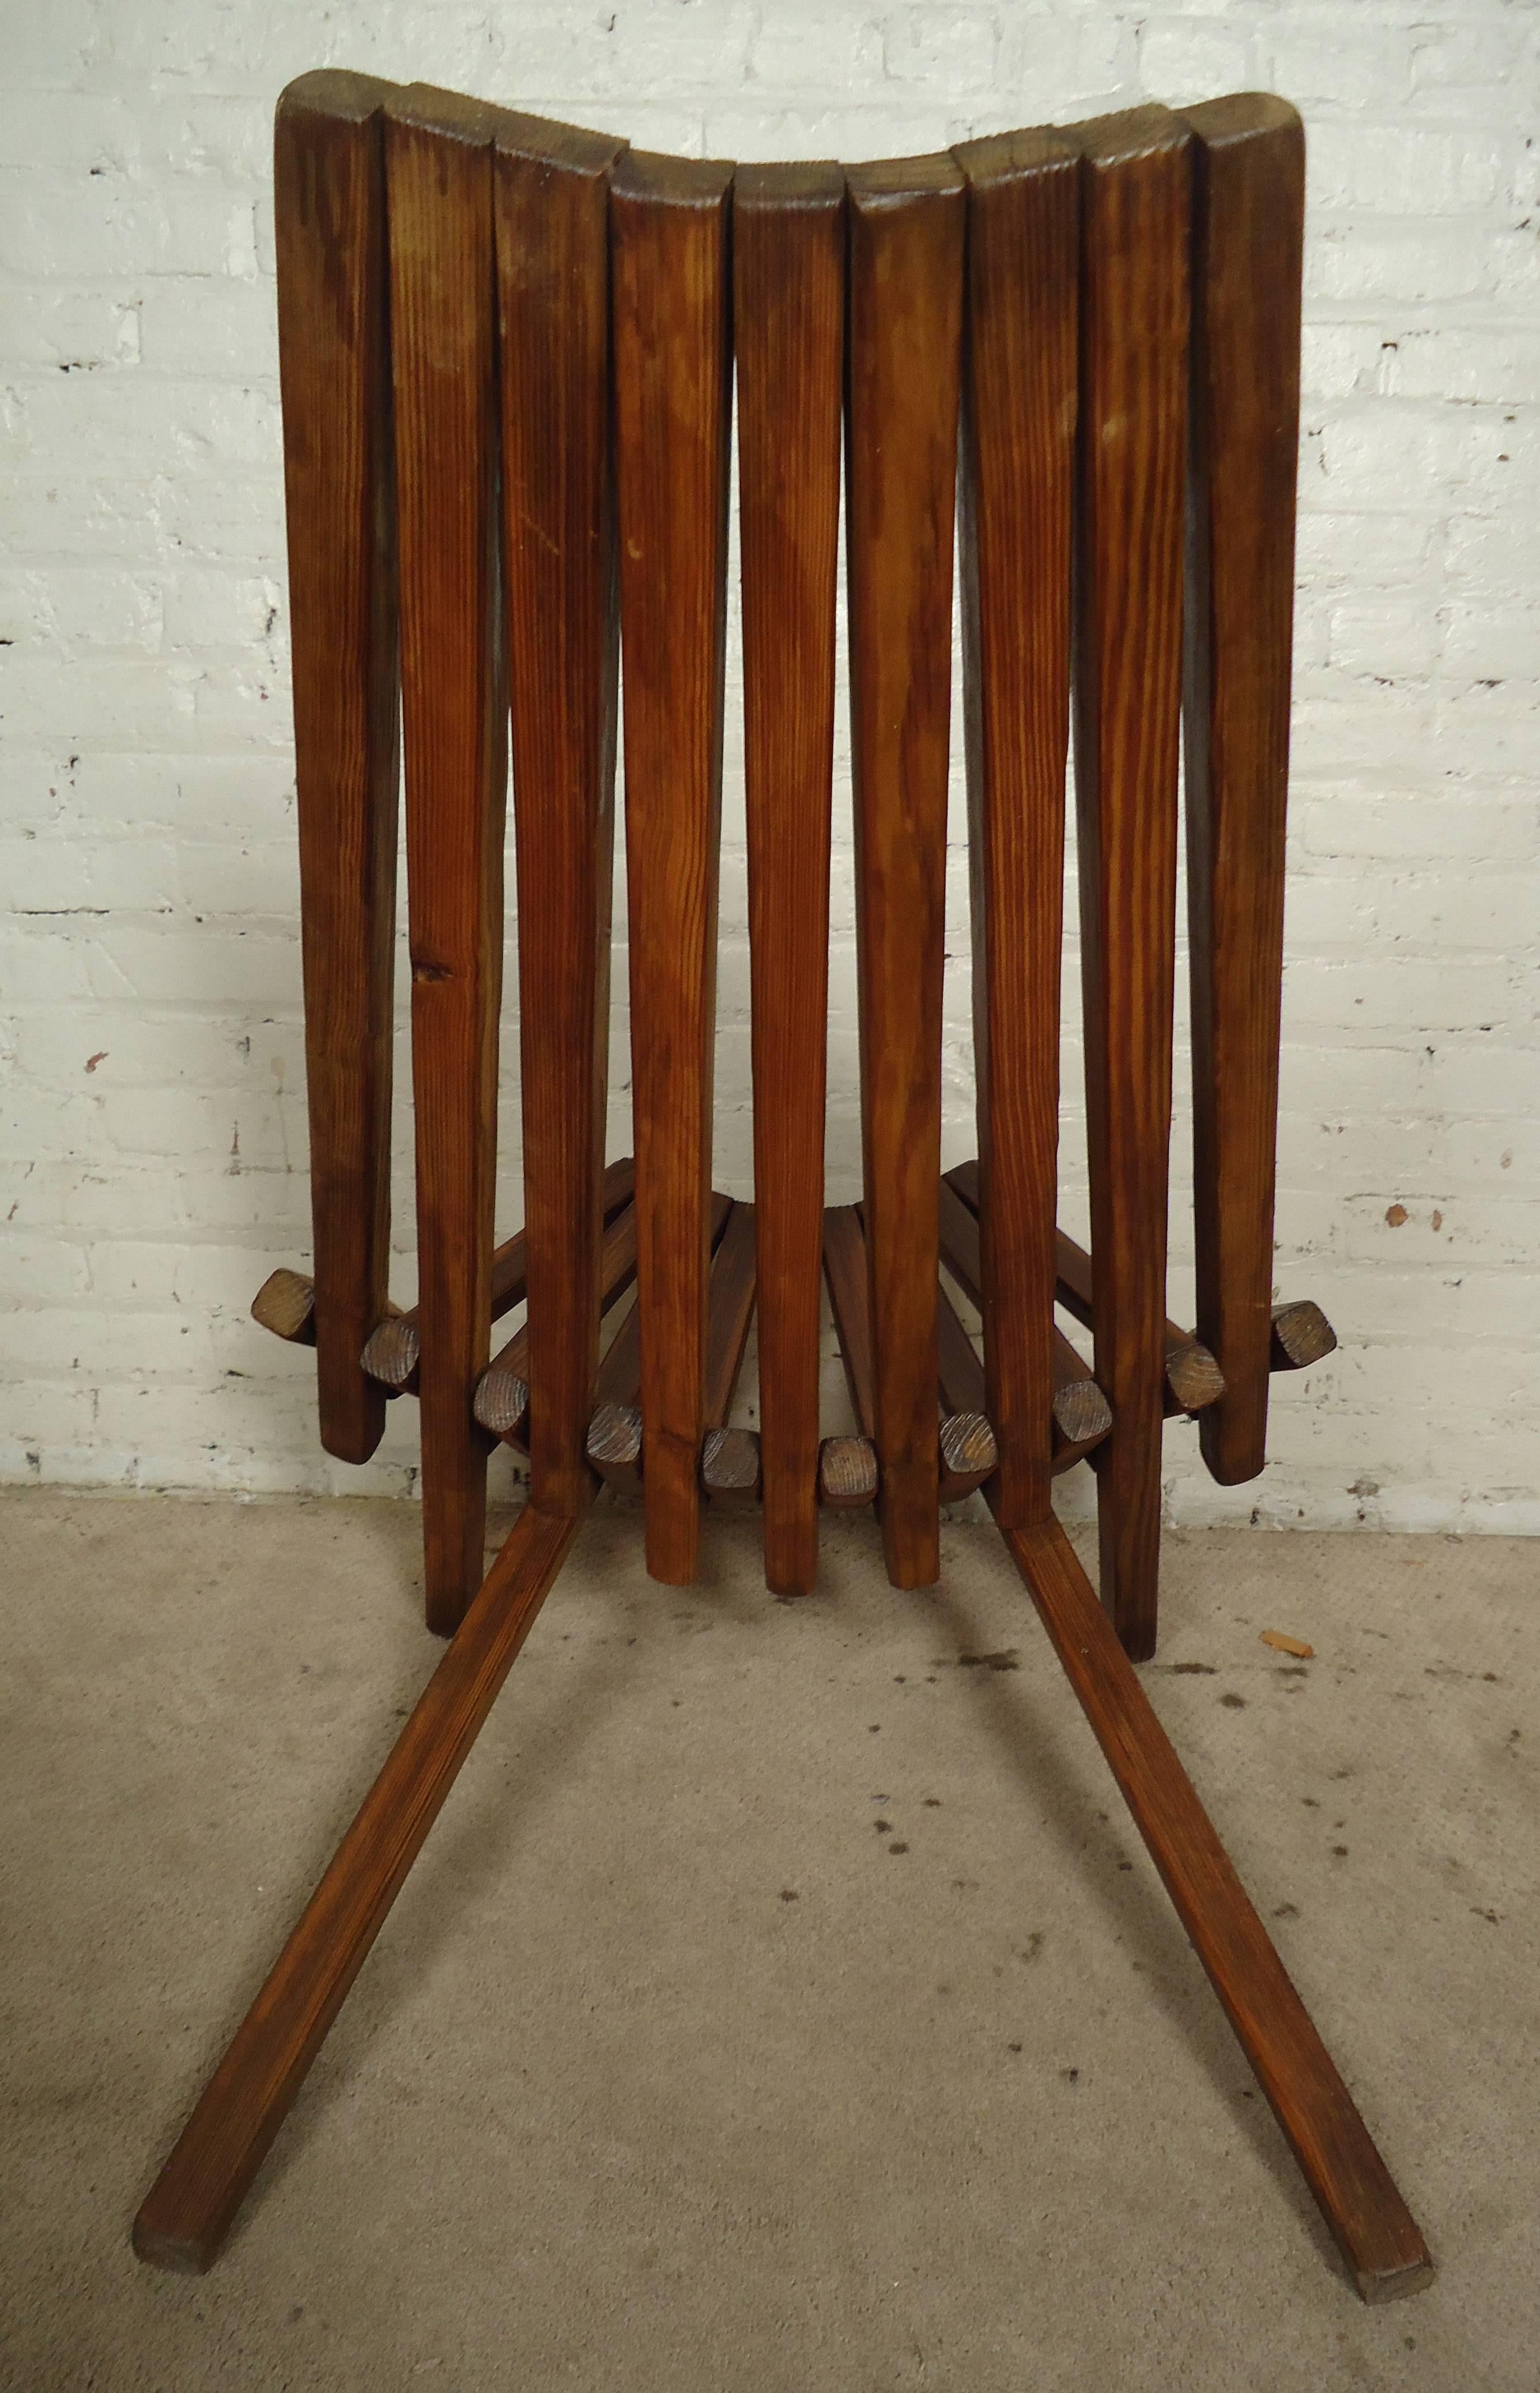 wooden slat chairs